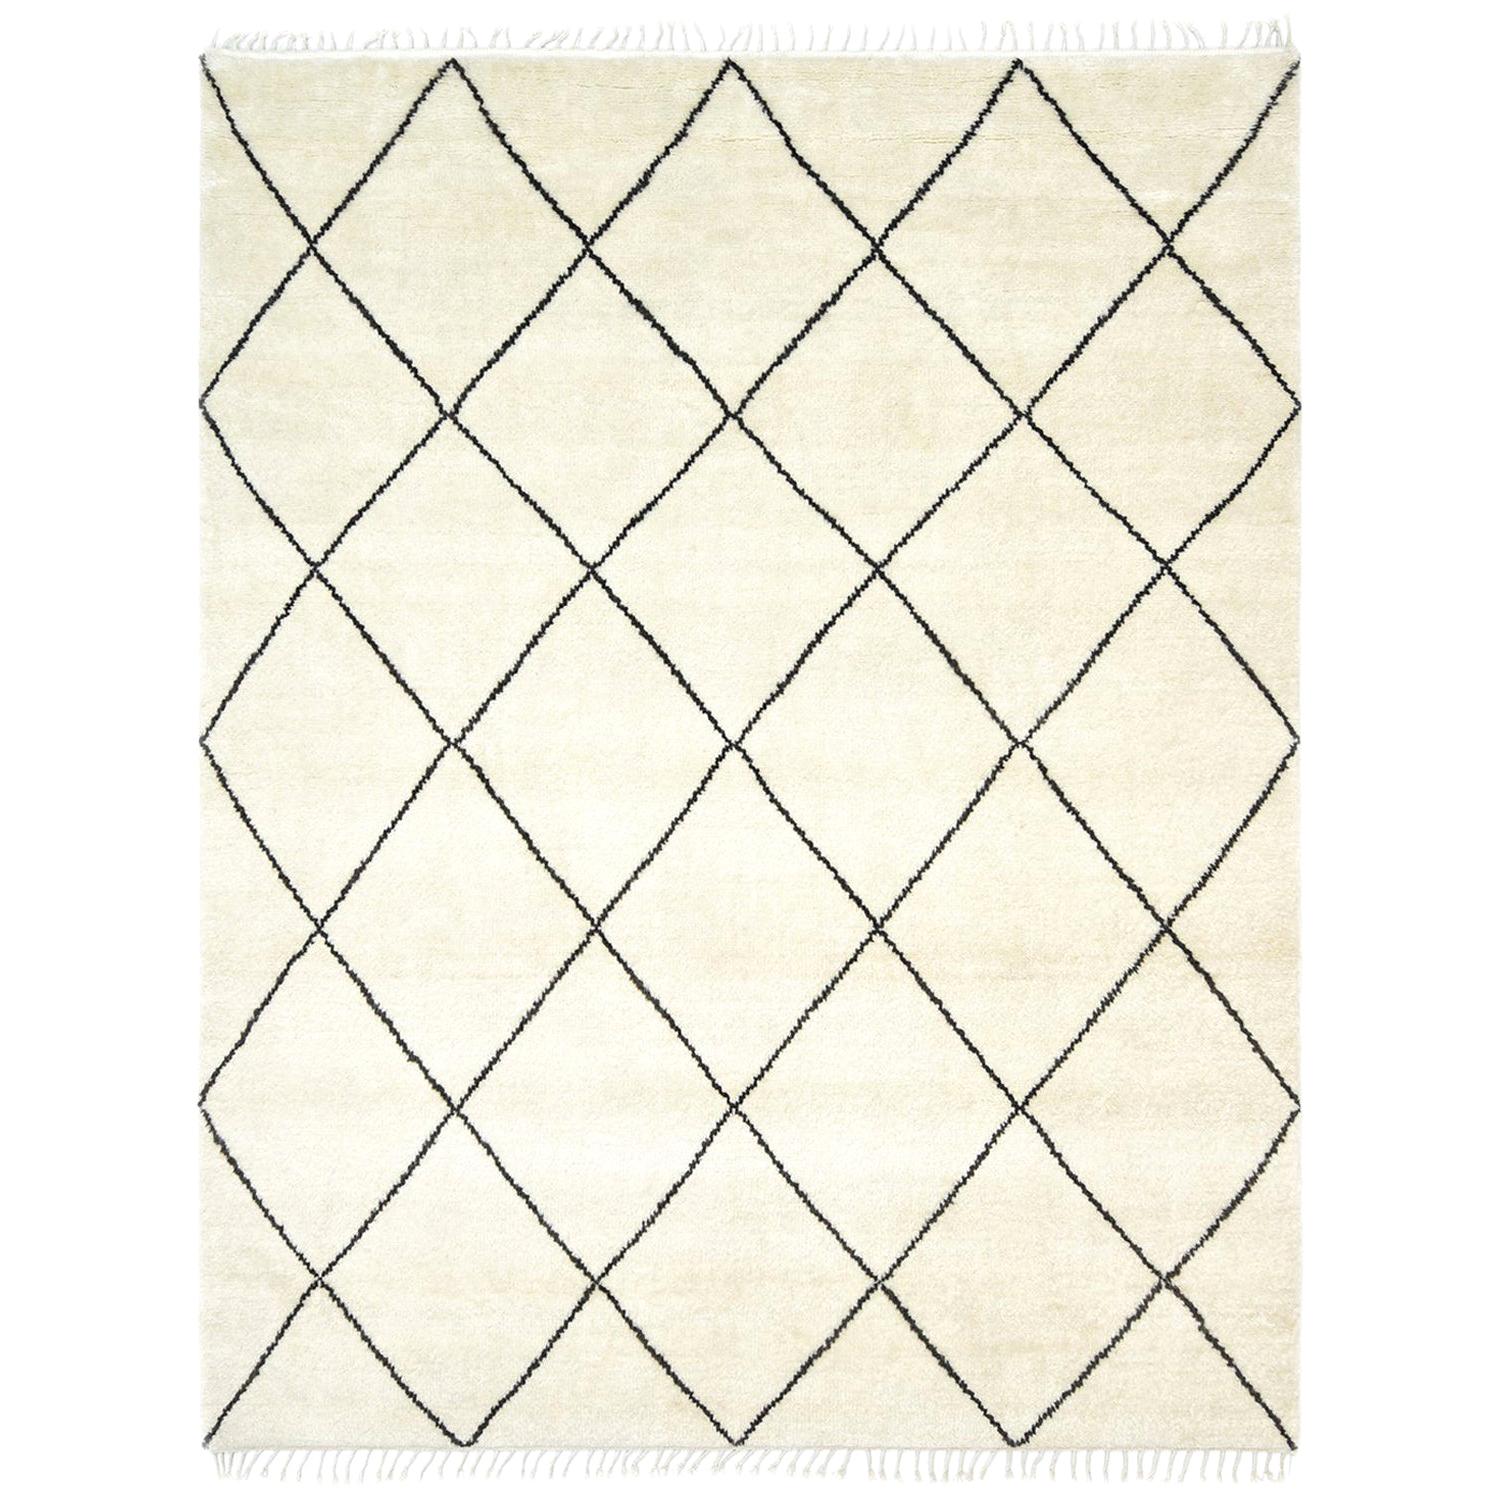 Indian Made Hand-Knotted Bohemian Moroccan Inspired Area Rug